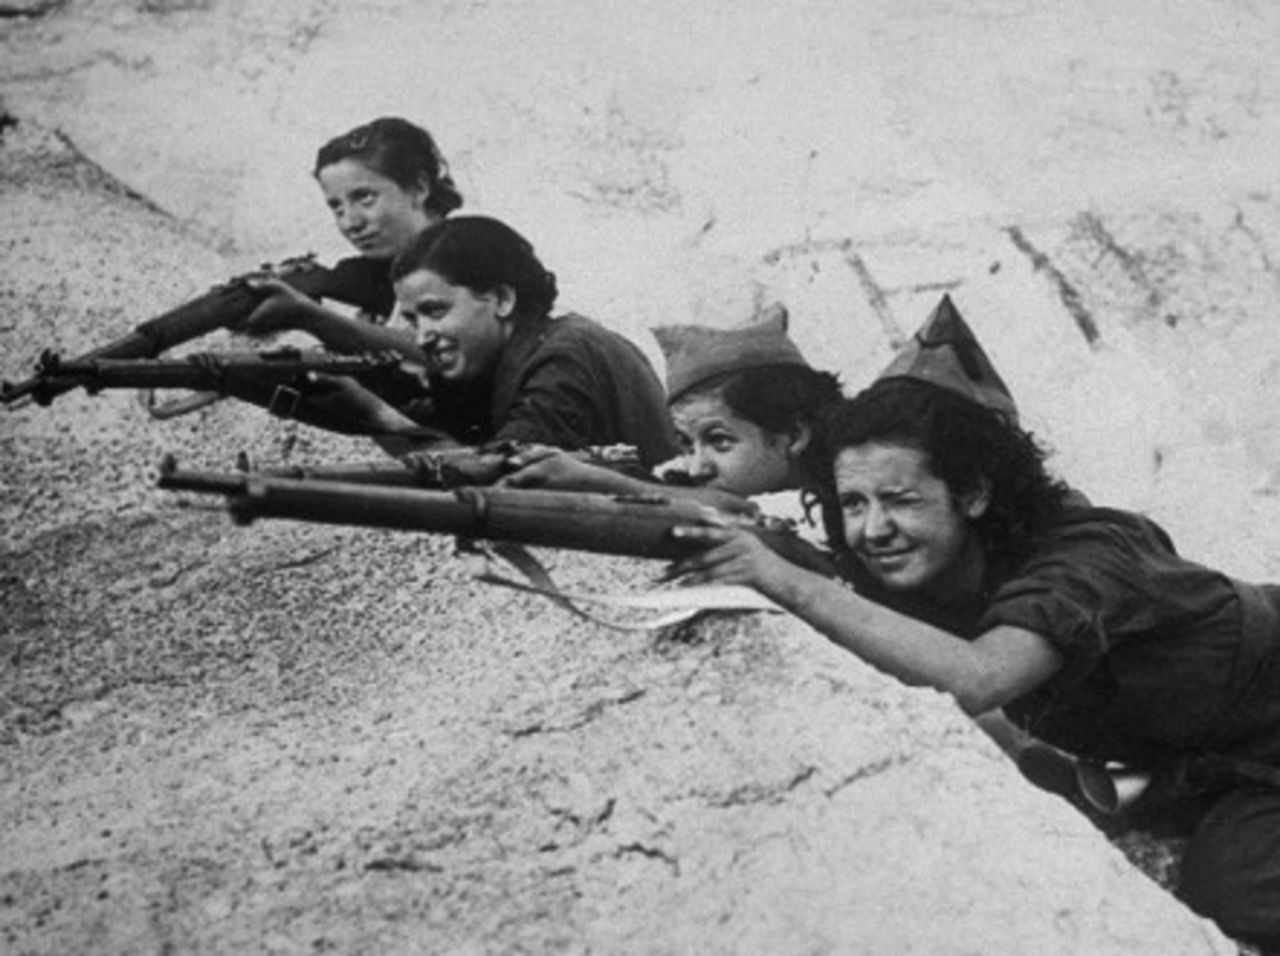 Girl snipers in the Spanish Civil War, 1936. - (Getty Images)